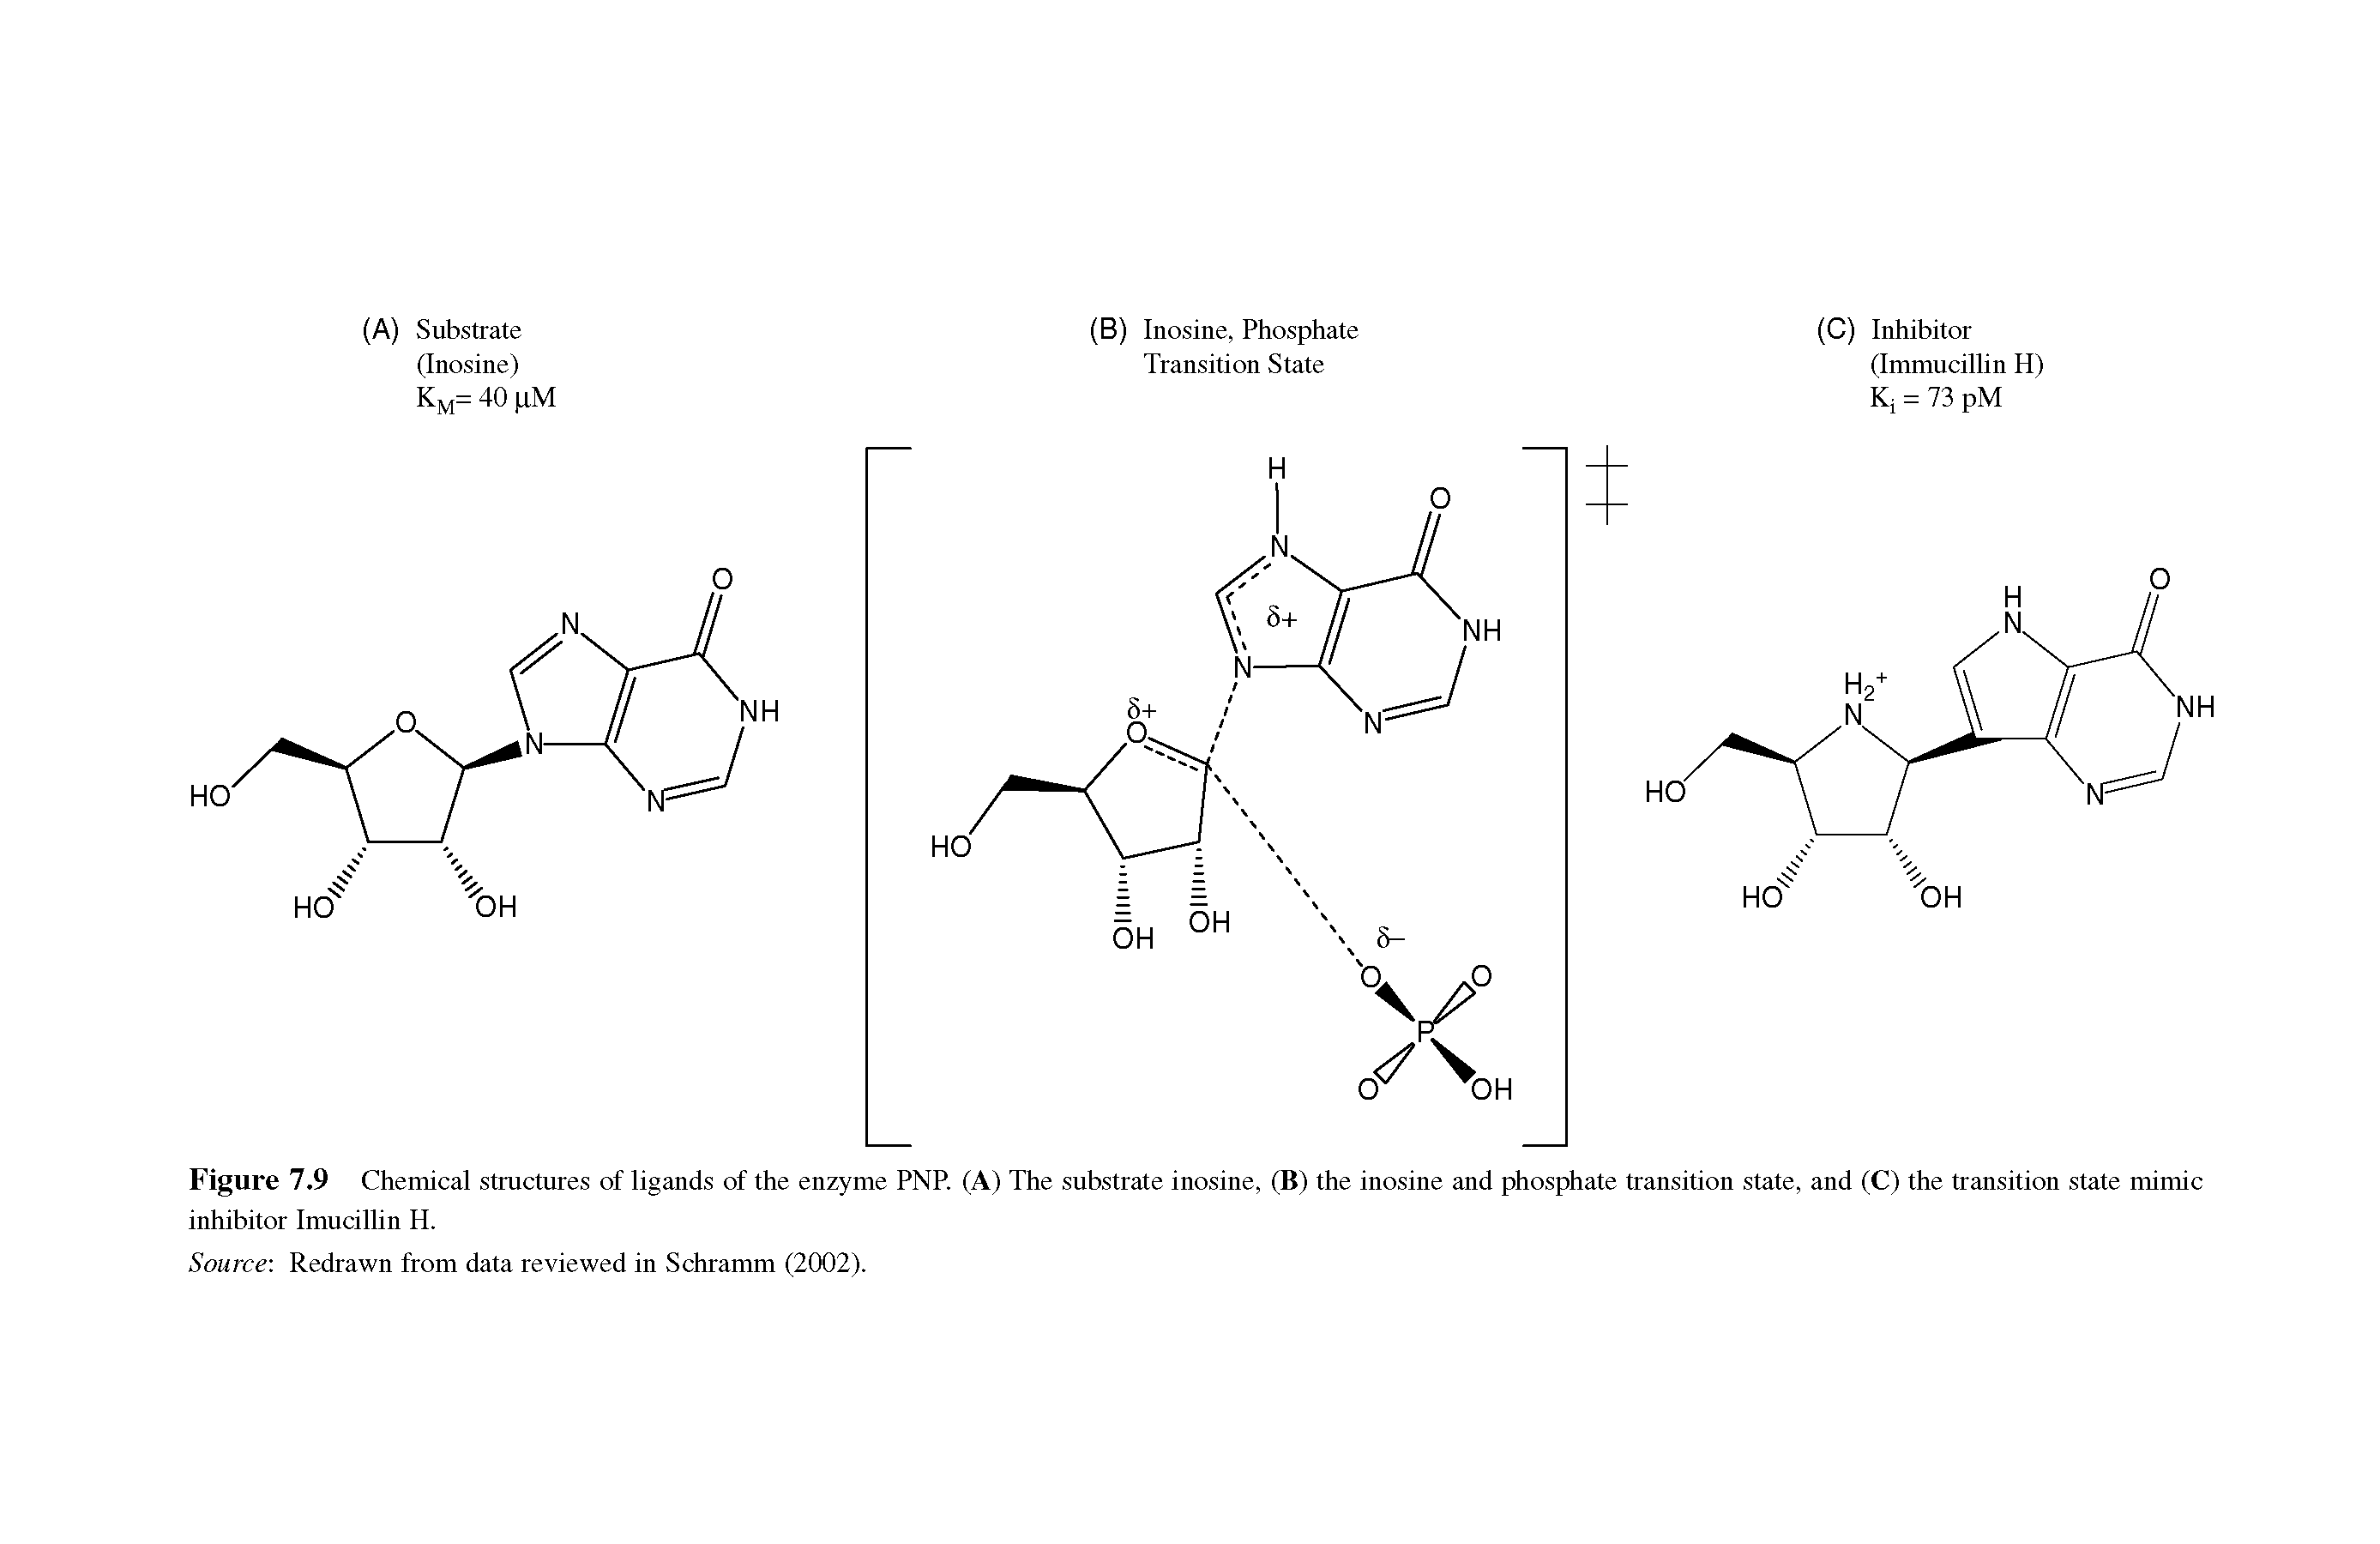 Figure 7.9 Chemical structures of ligands of the enzyme PNP. (A) The substrate inosine, (B) the inosine and phosphate transition state, and (C) the transition state mimic inhibitor Imucillin H.